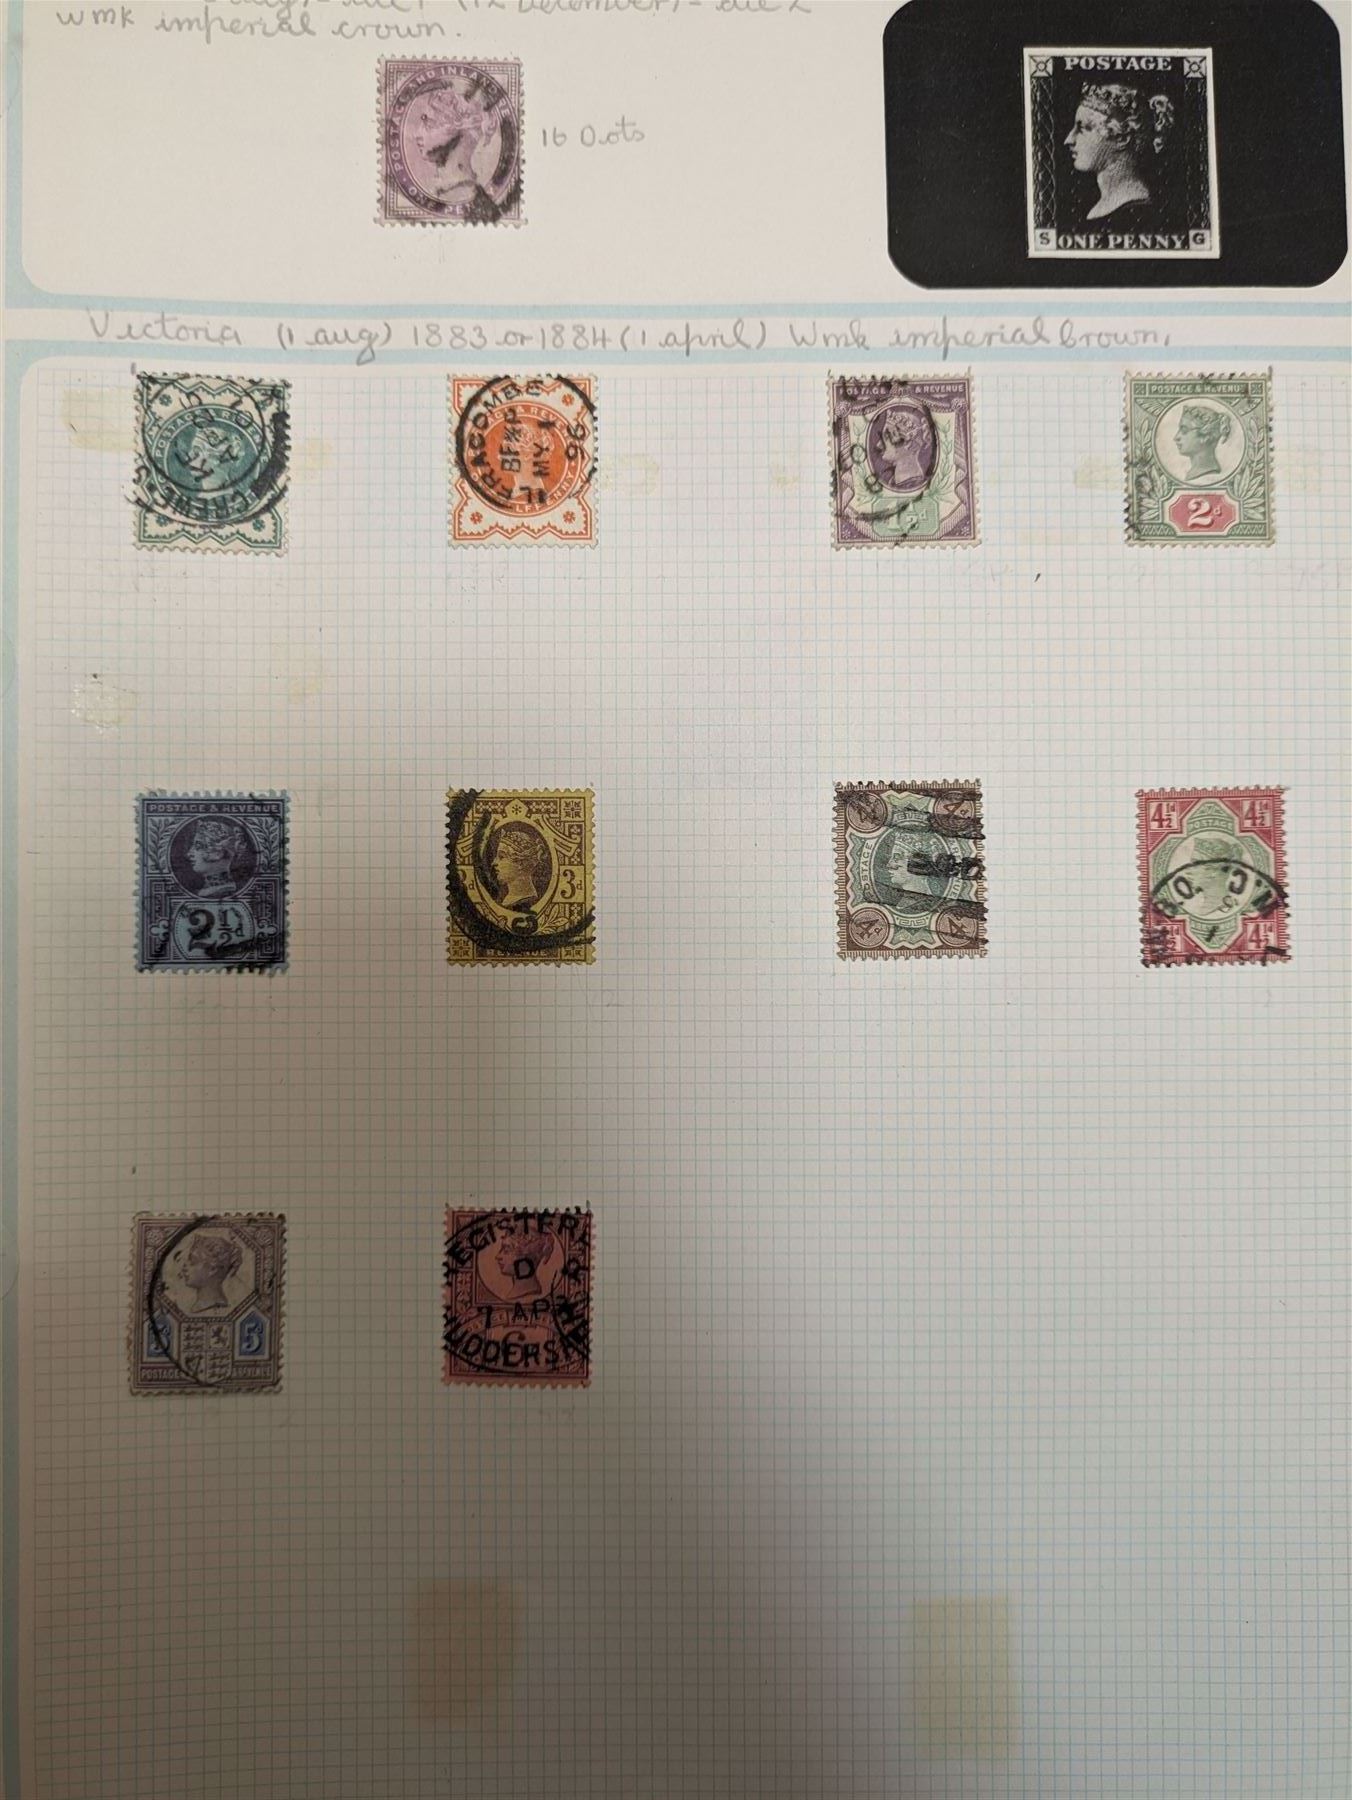 Mostly Great British stamps including Queen Victoria perf penny reds - Image 3 of 4